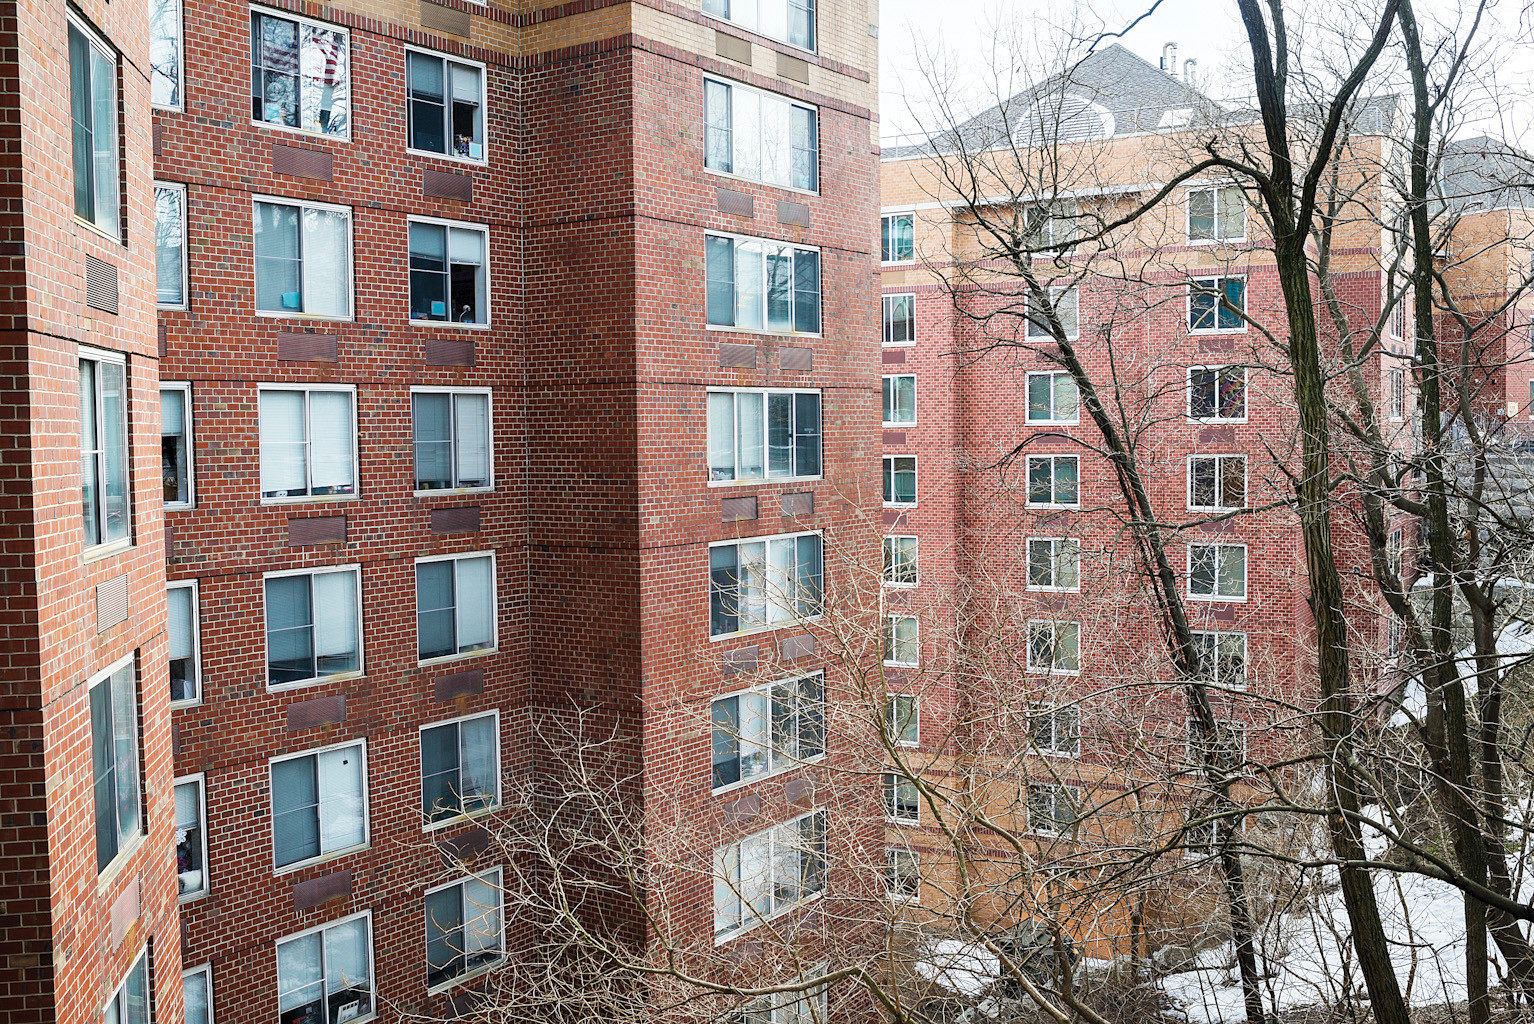 Horan Hall at Manhattan College, which some residents say has a mouse infestation, on March 11.